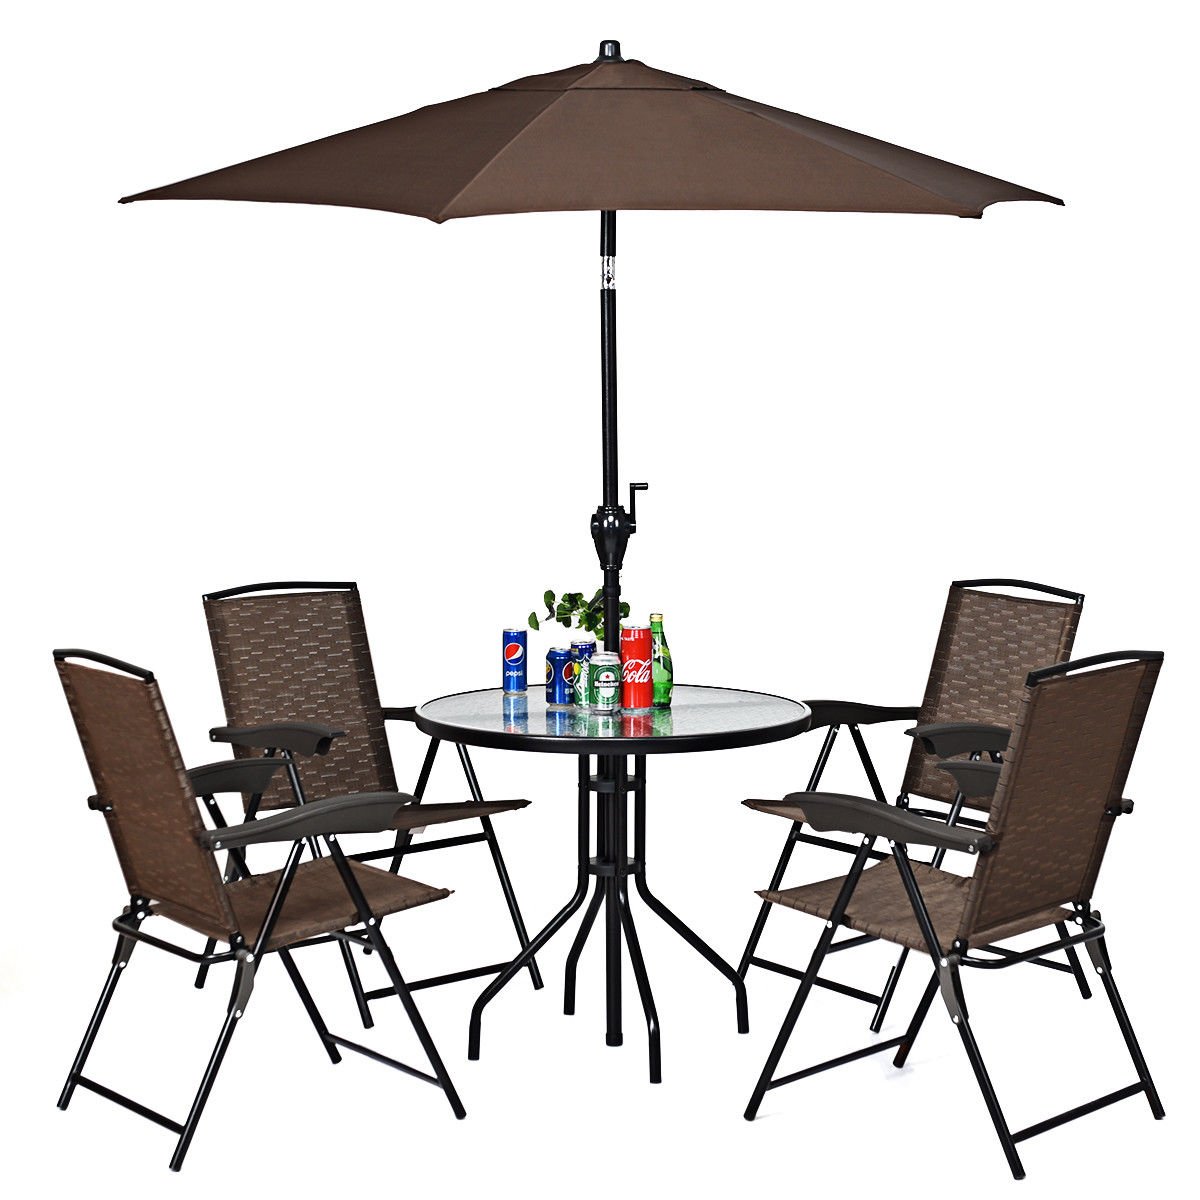 4PCS Adjustable Folding Fabric Chair Powder Coated Steel Tube Frame Indoor Outdoor